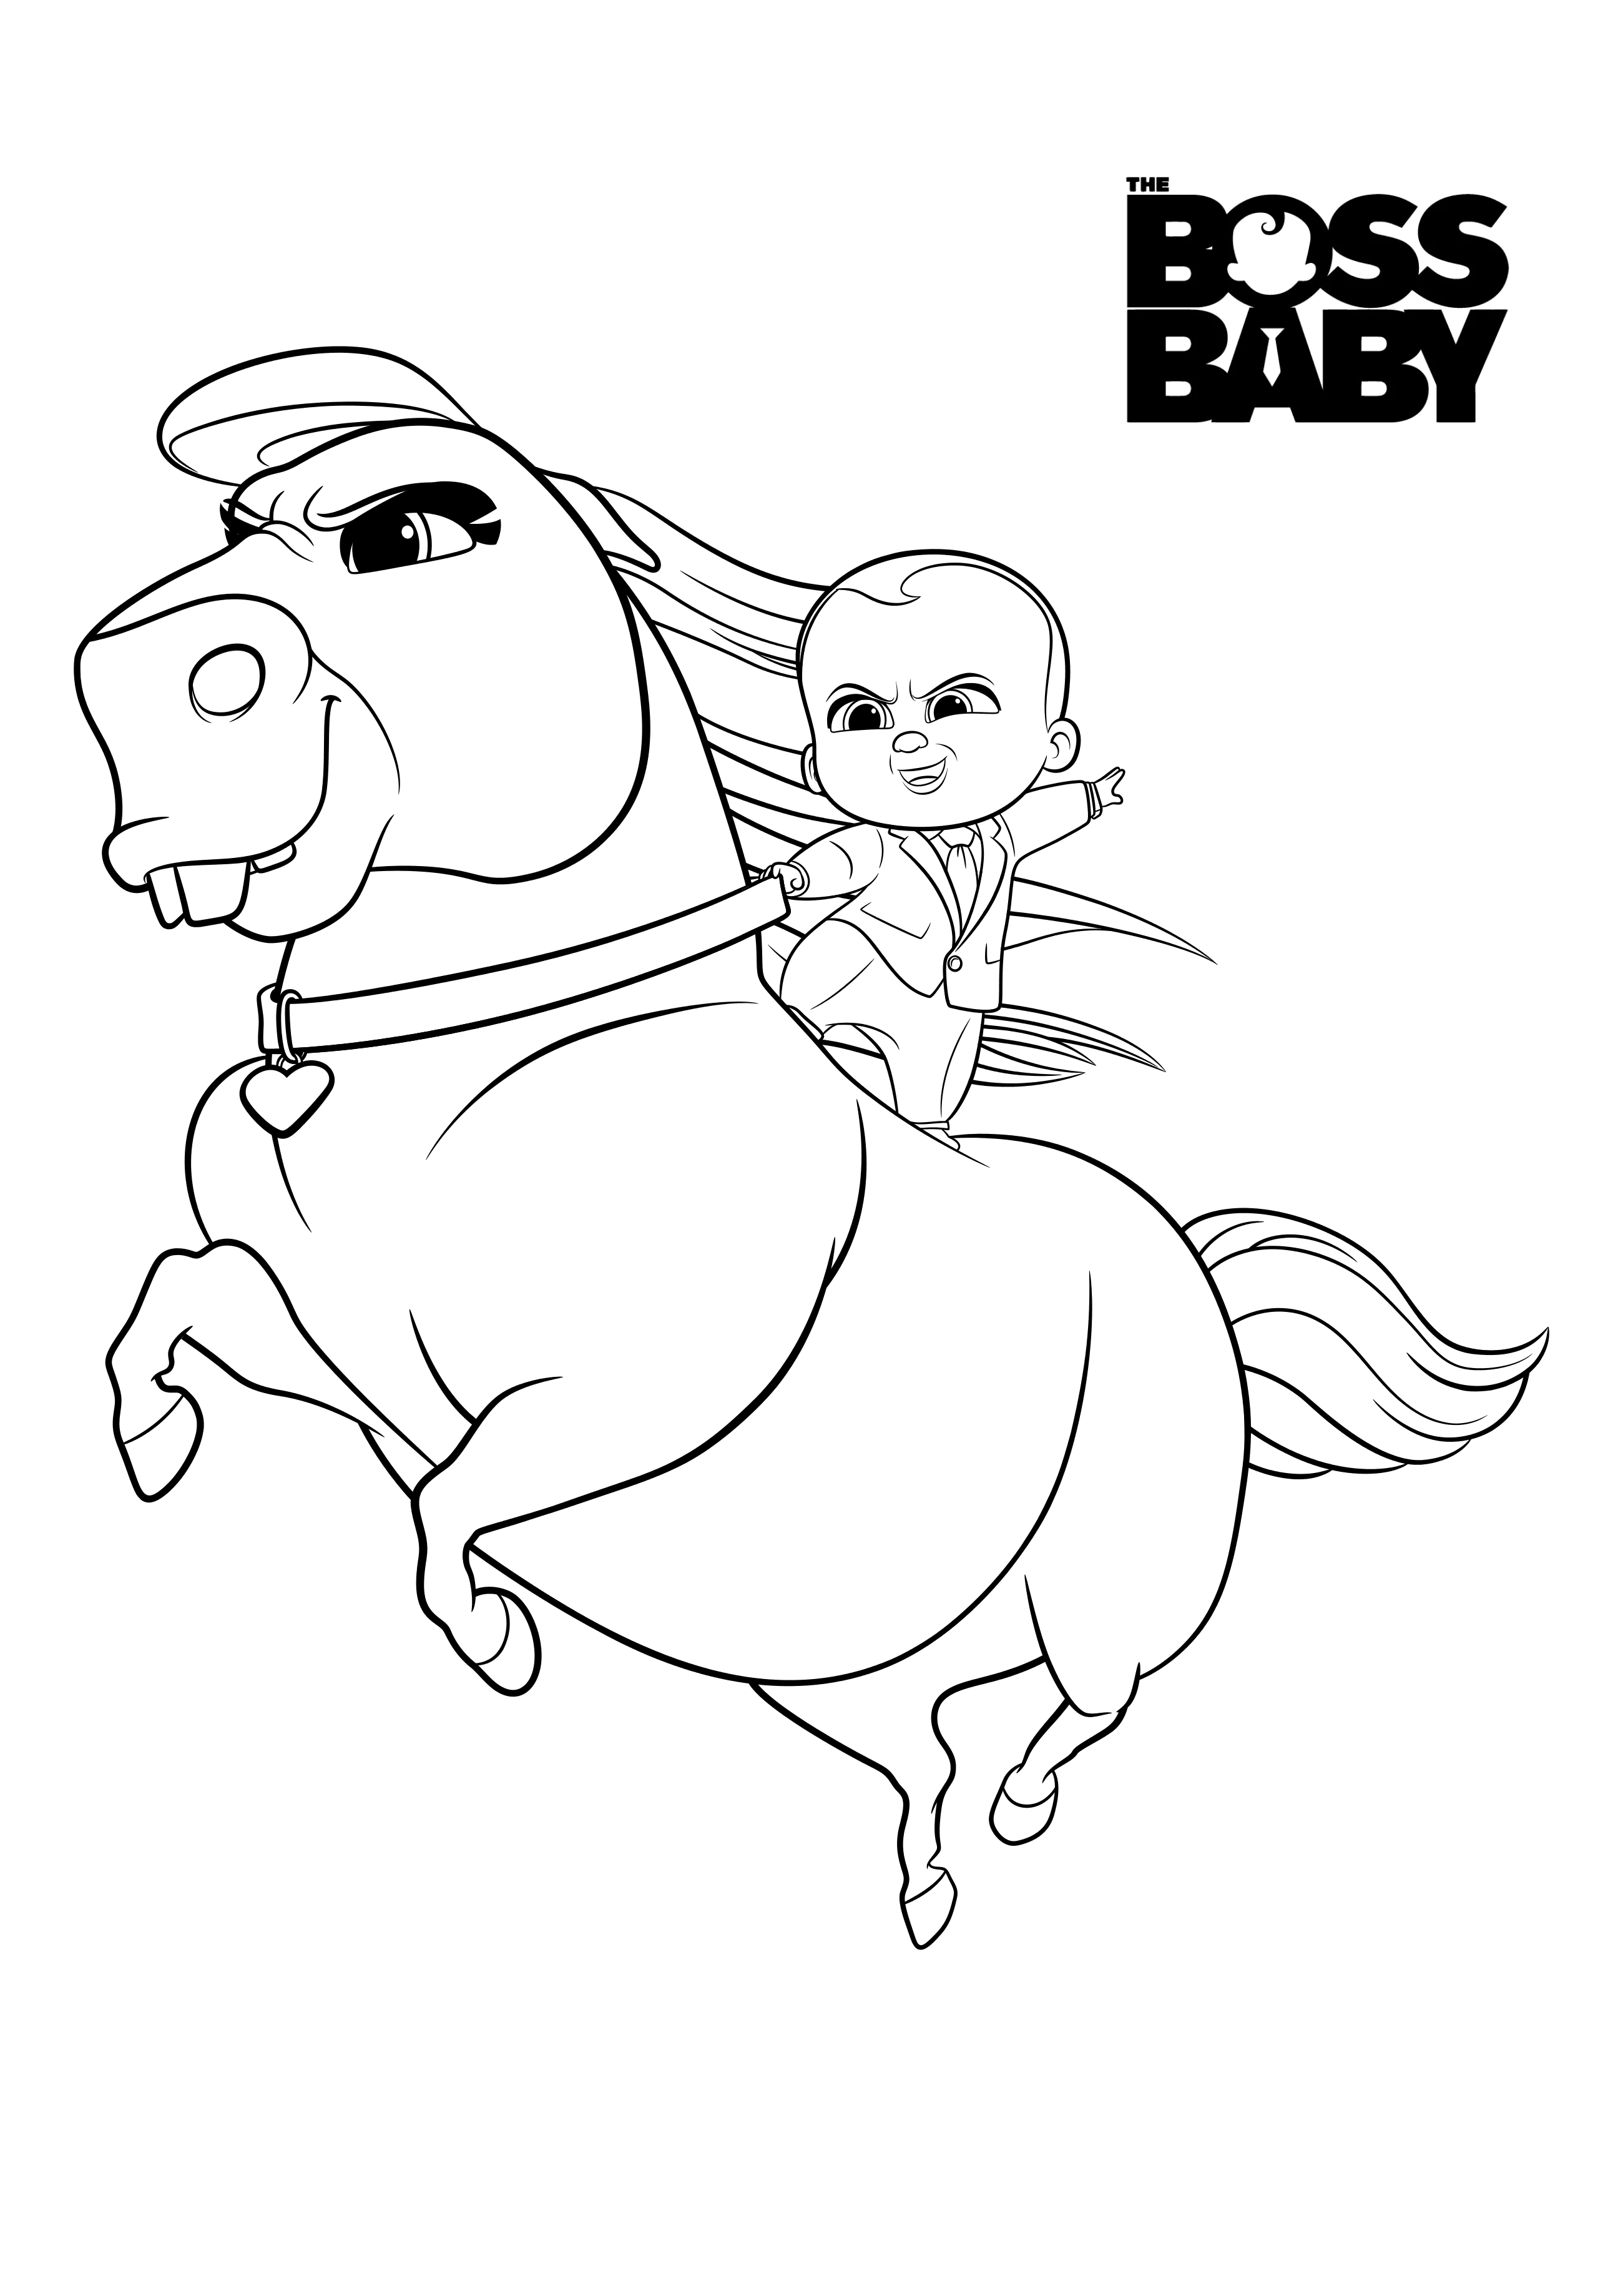 Coloring page Boss Baby 2 Boss baby and pony